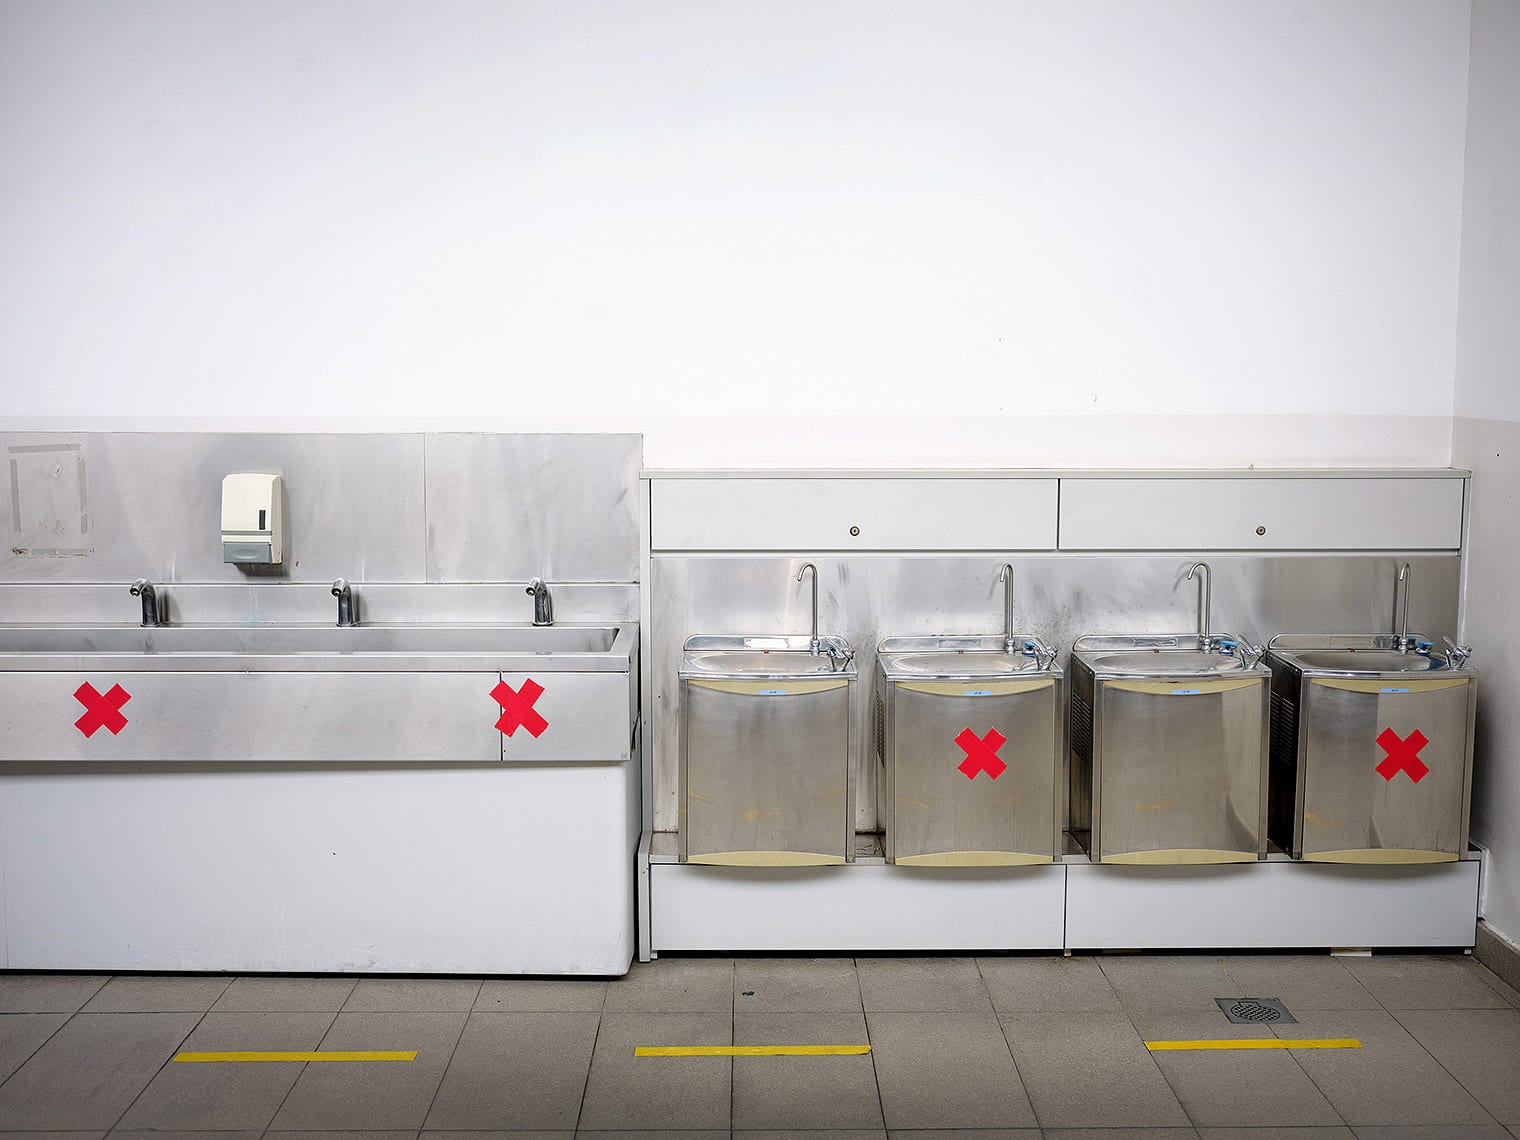 Seven water fountains lined up against the wall; every other foundatin is marked with a red X in tape